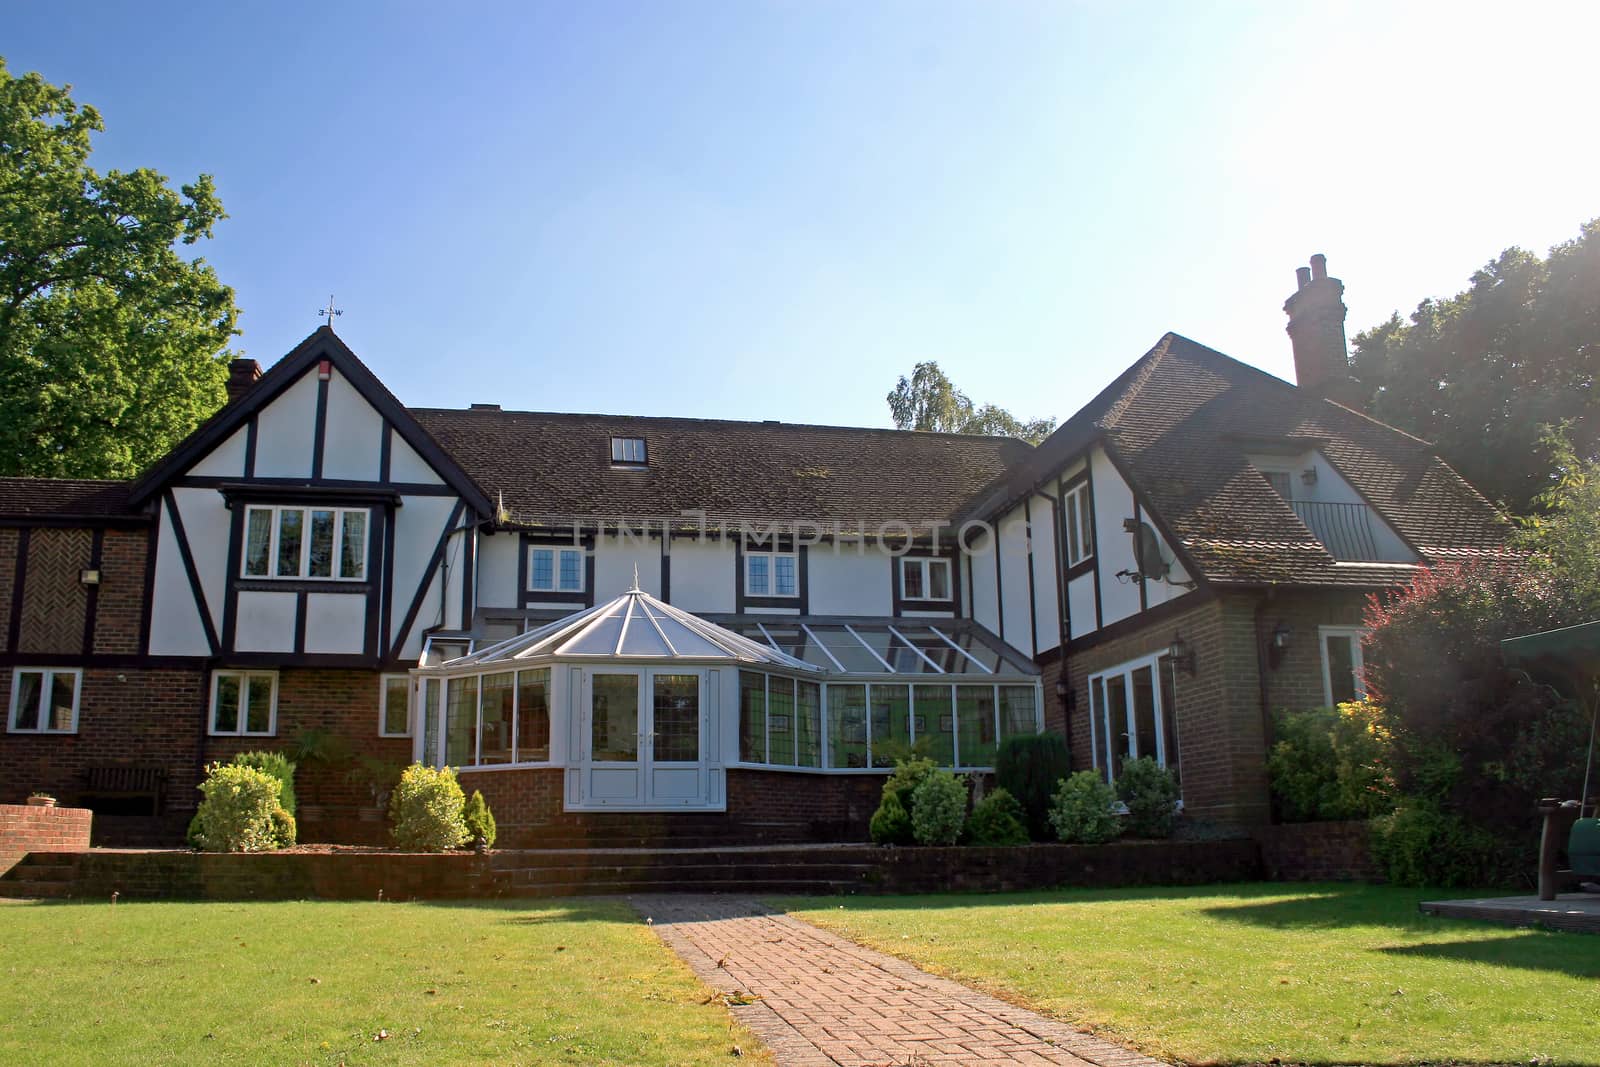 A large estate home, Tudor style, in the UK